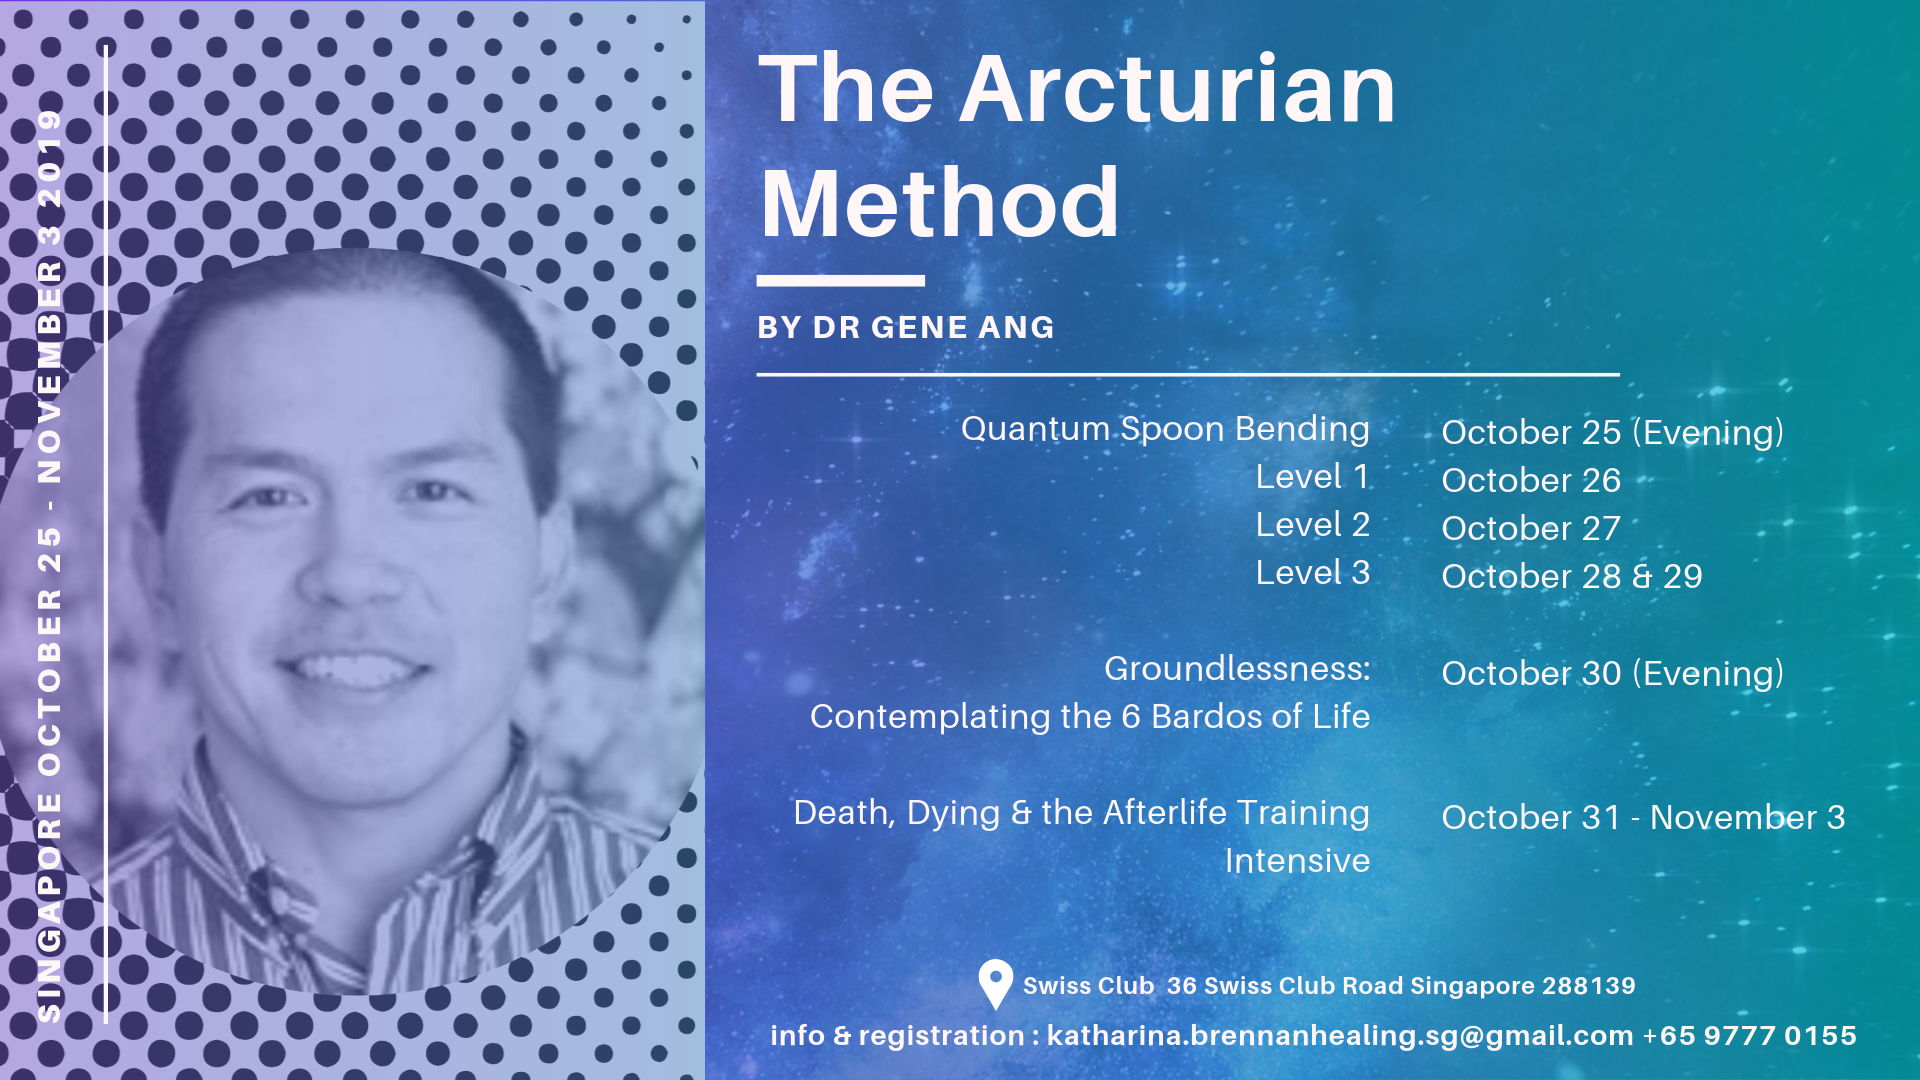 Gene Ang in Singapore Fall 2019 Arcturian Method